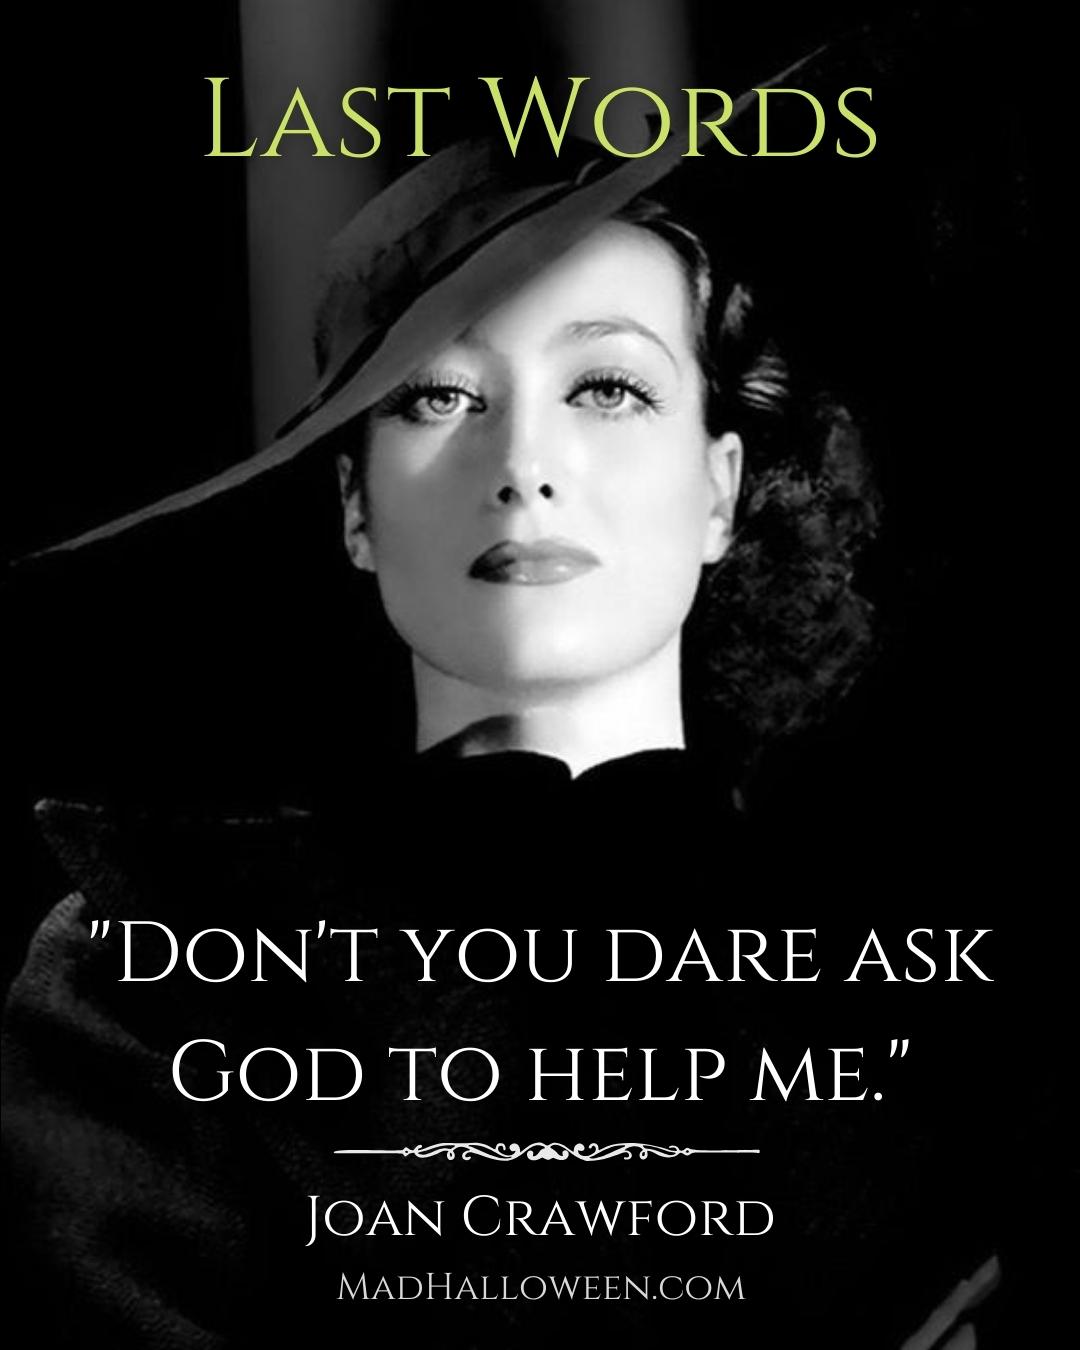 Famous Last Words Quotes of the Departed - Joan Crawford - Mad Halloween